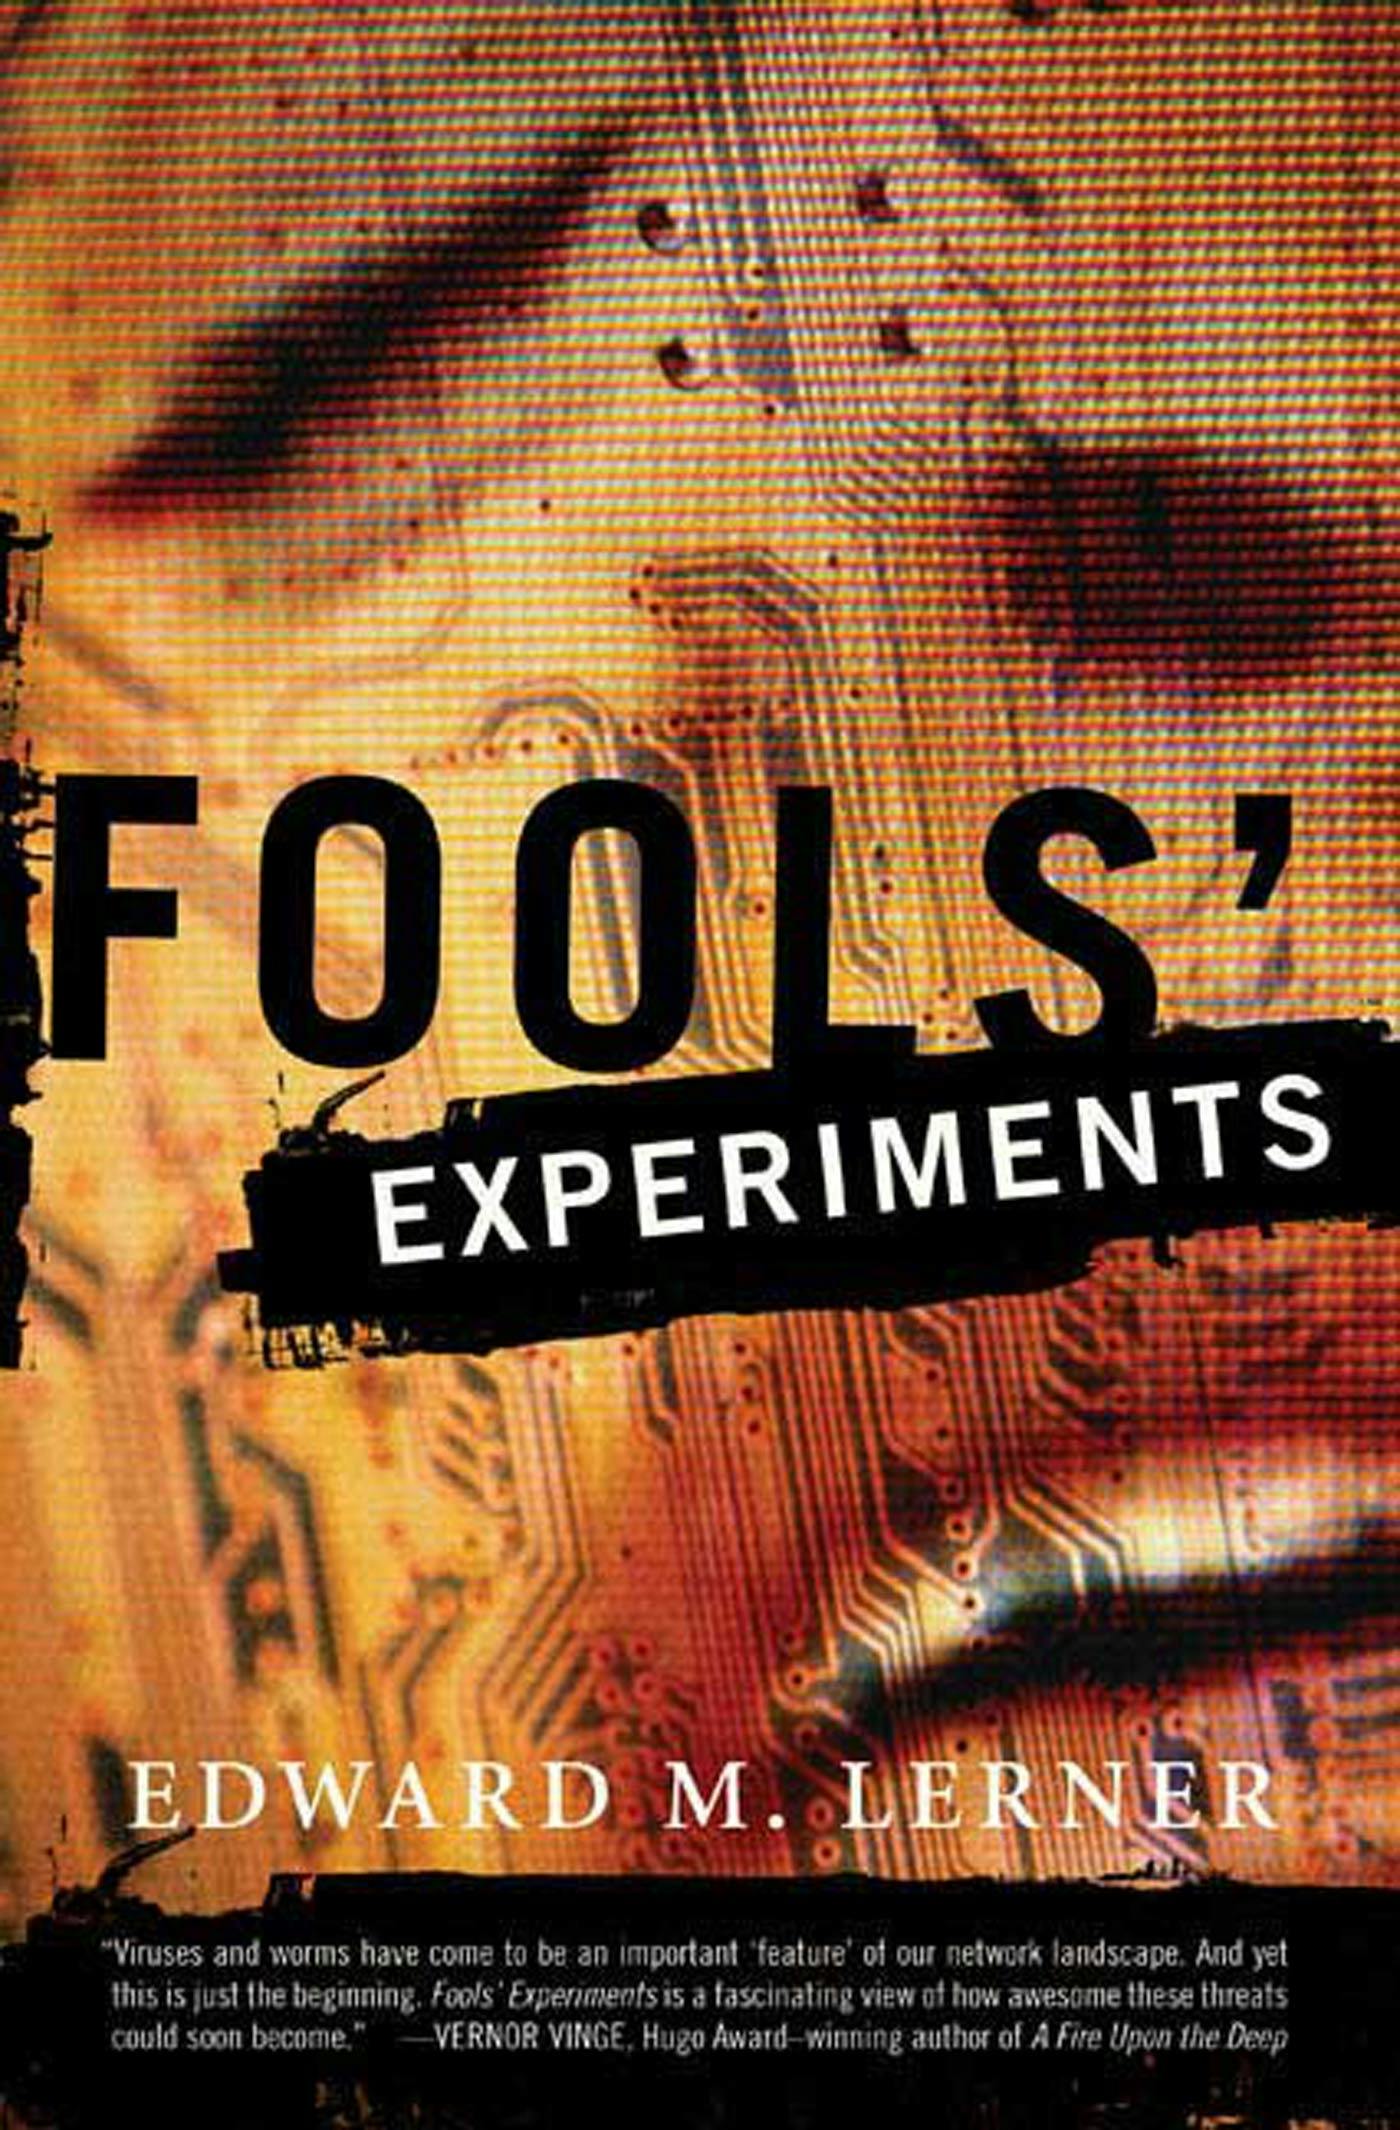 Cover for the book titled as: Fools' Experiments